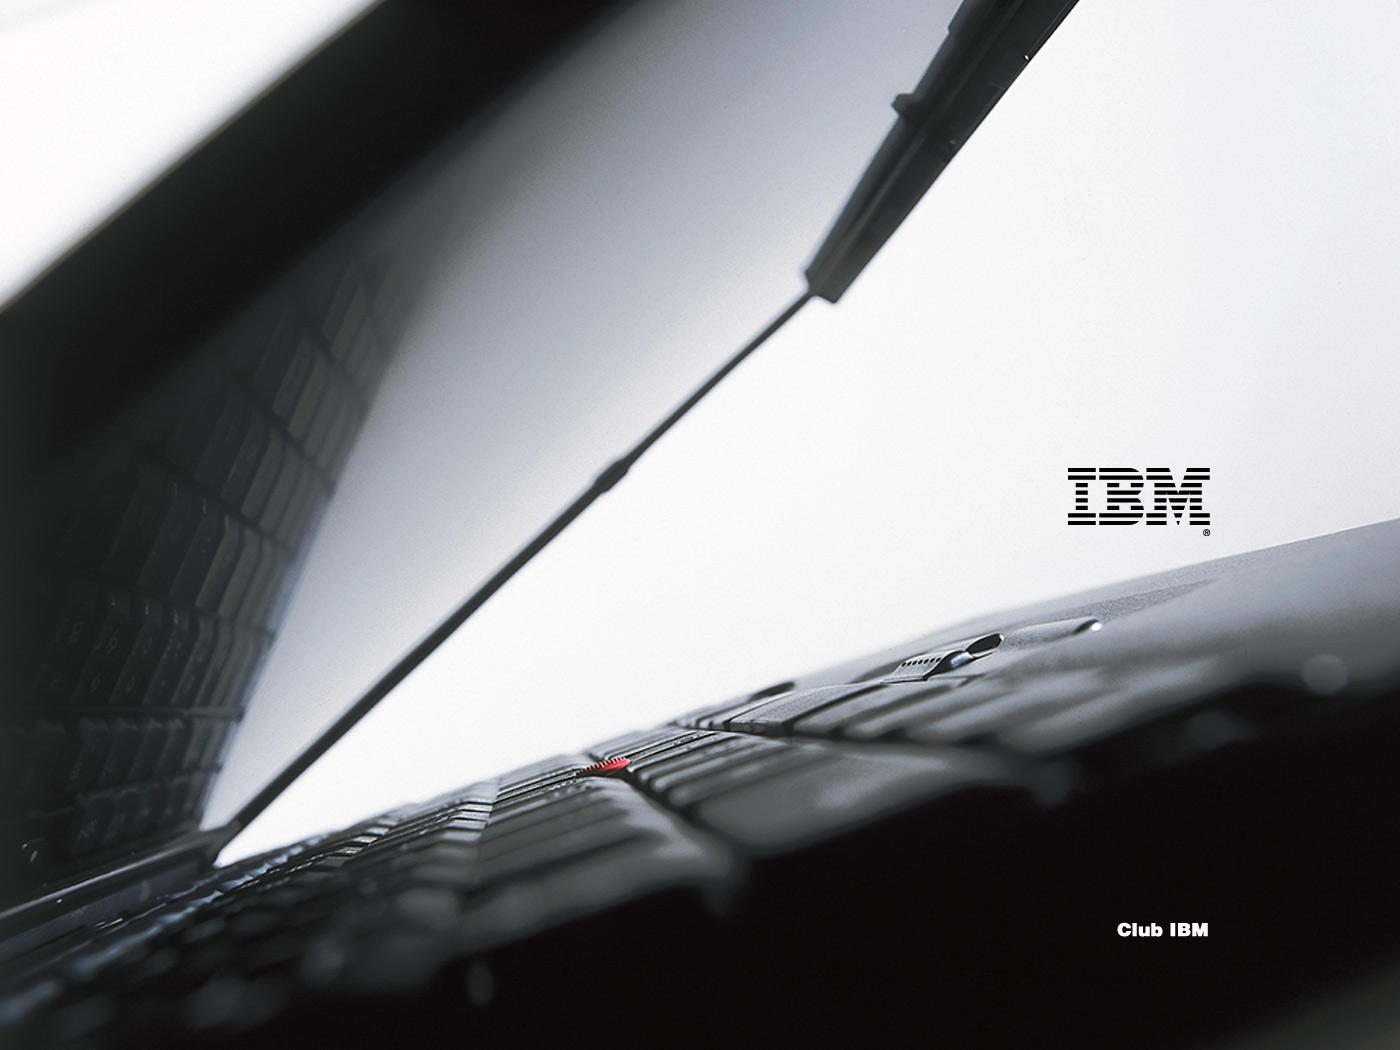 Loptop IBM wallpapers and images   wallpapers pictures photos